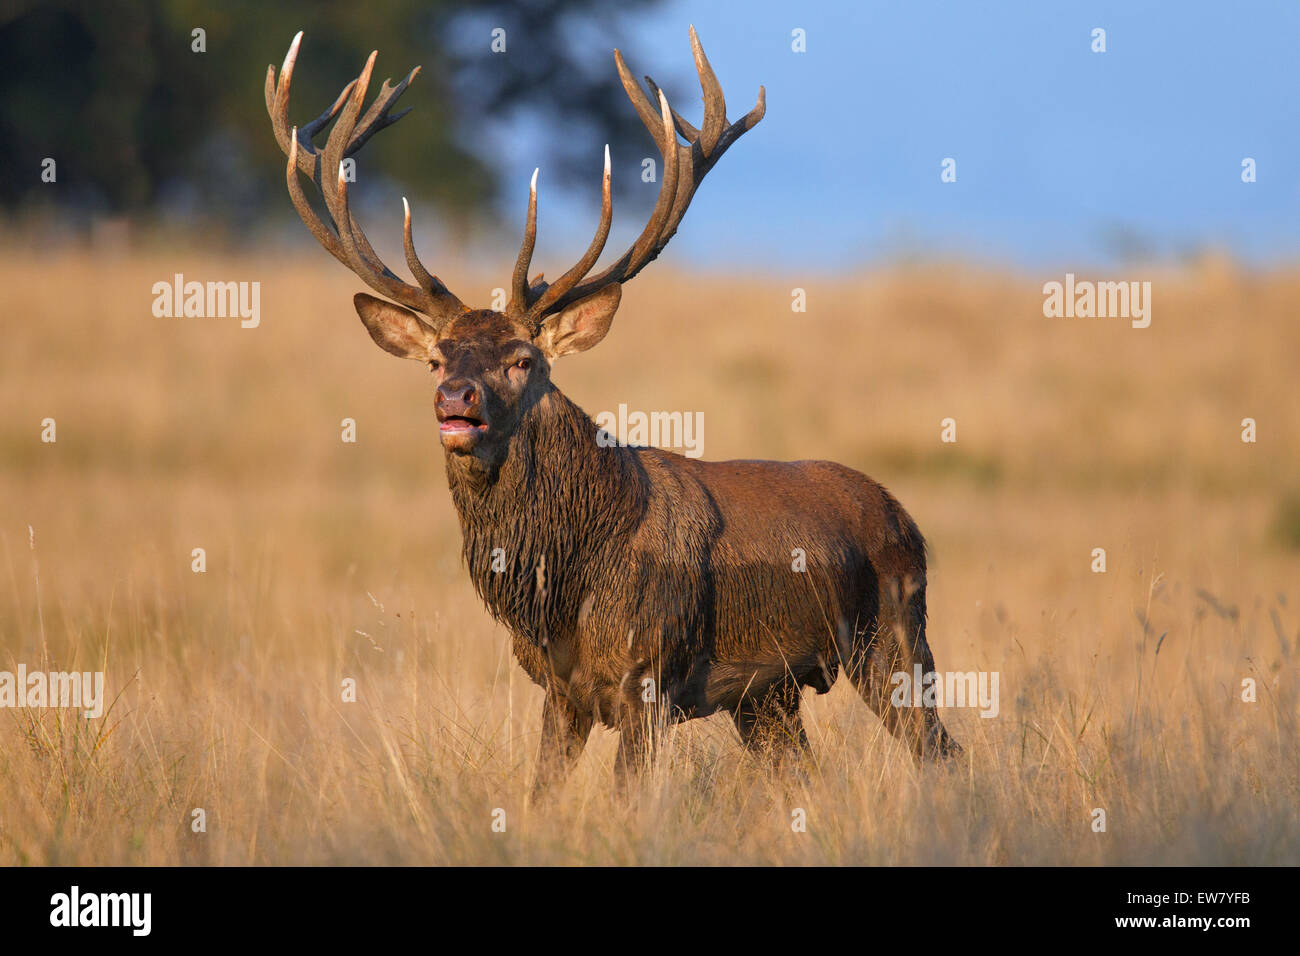 Red deer (Cervus elaphus) stag covered in mud bellowing in grassland during the rut in autumn Stock Photo